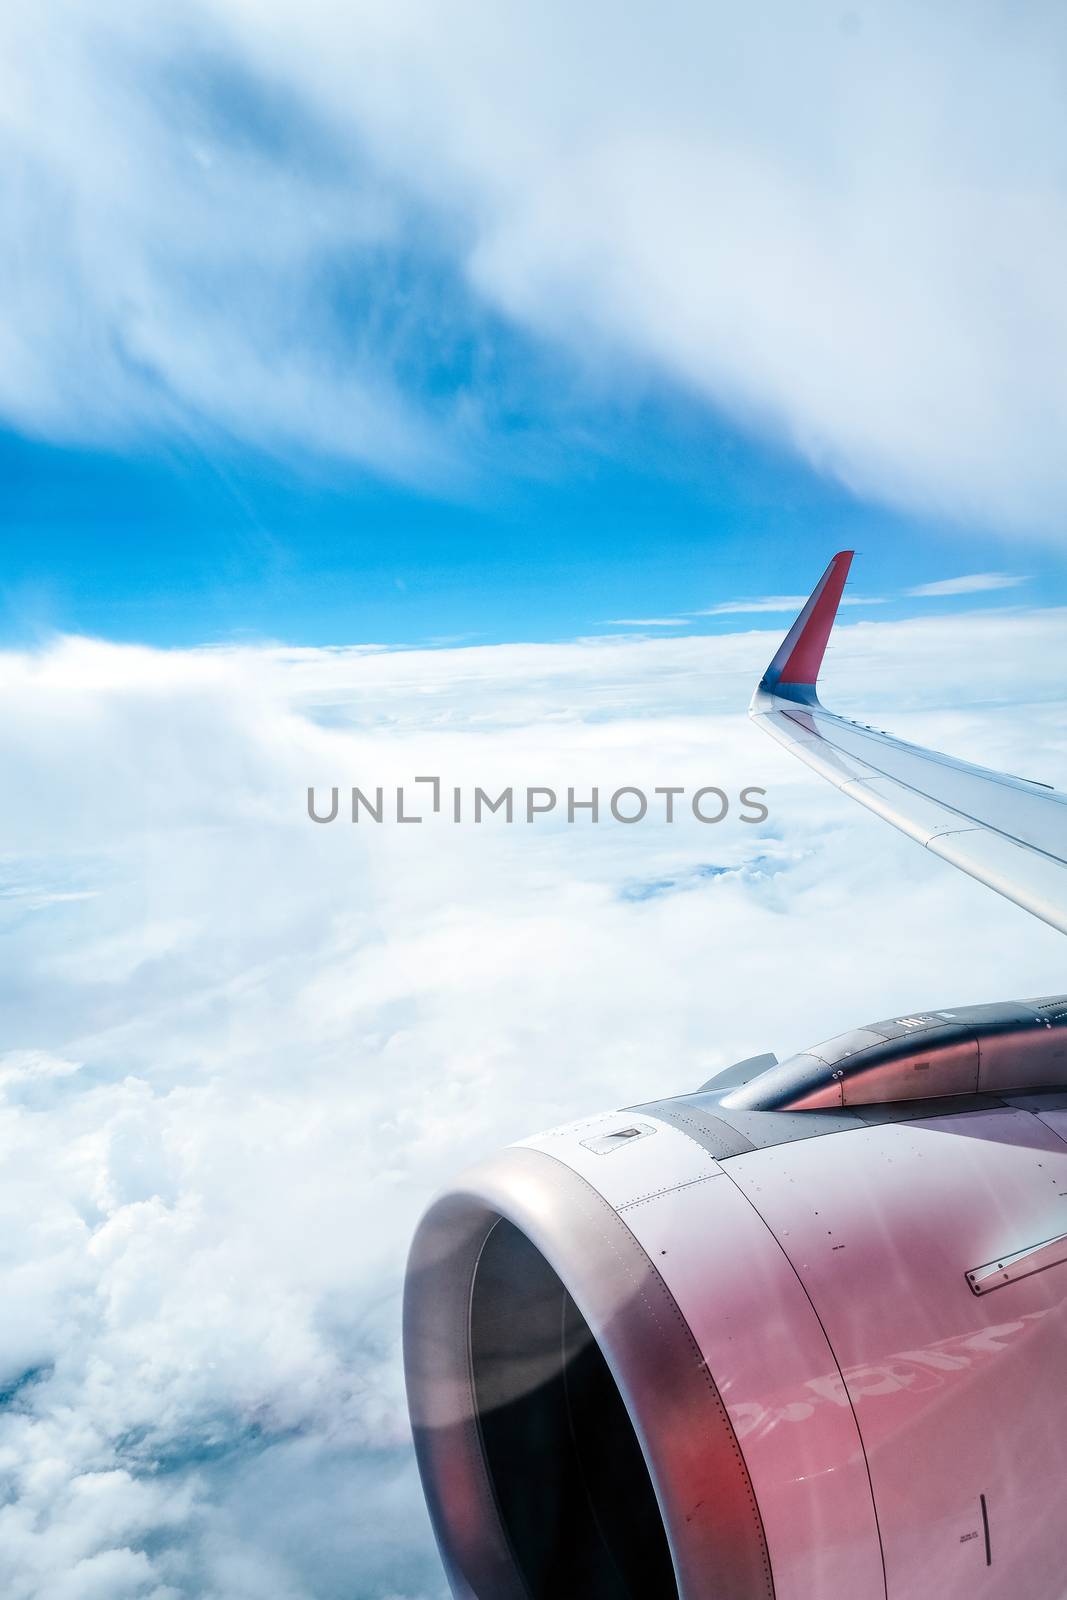 View from the window of the airplane by ponsulak